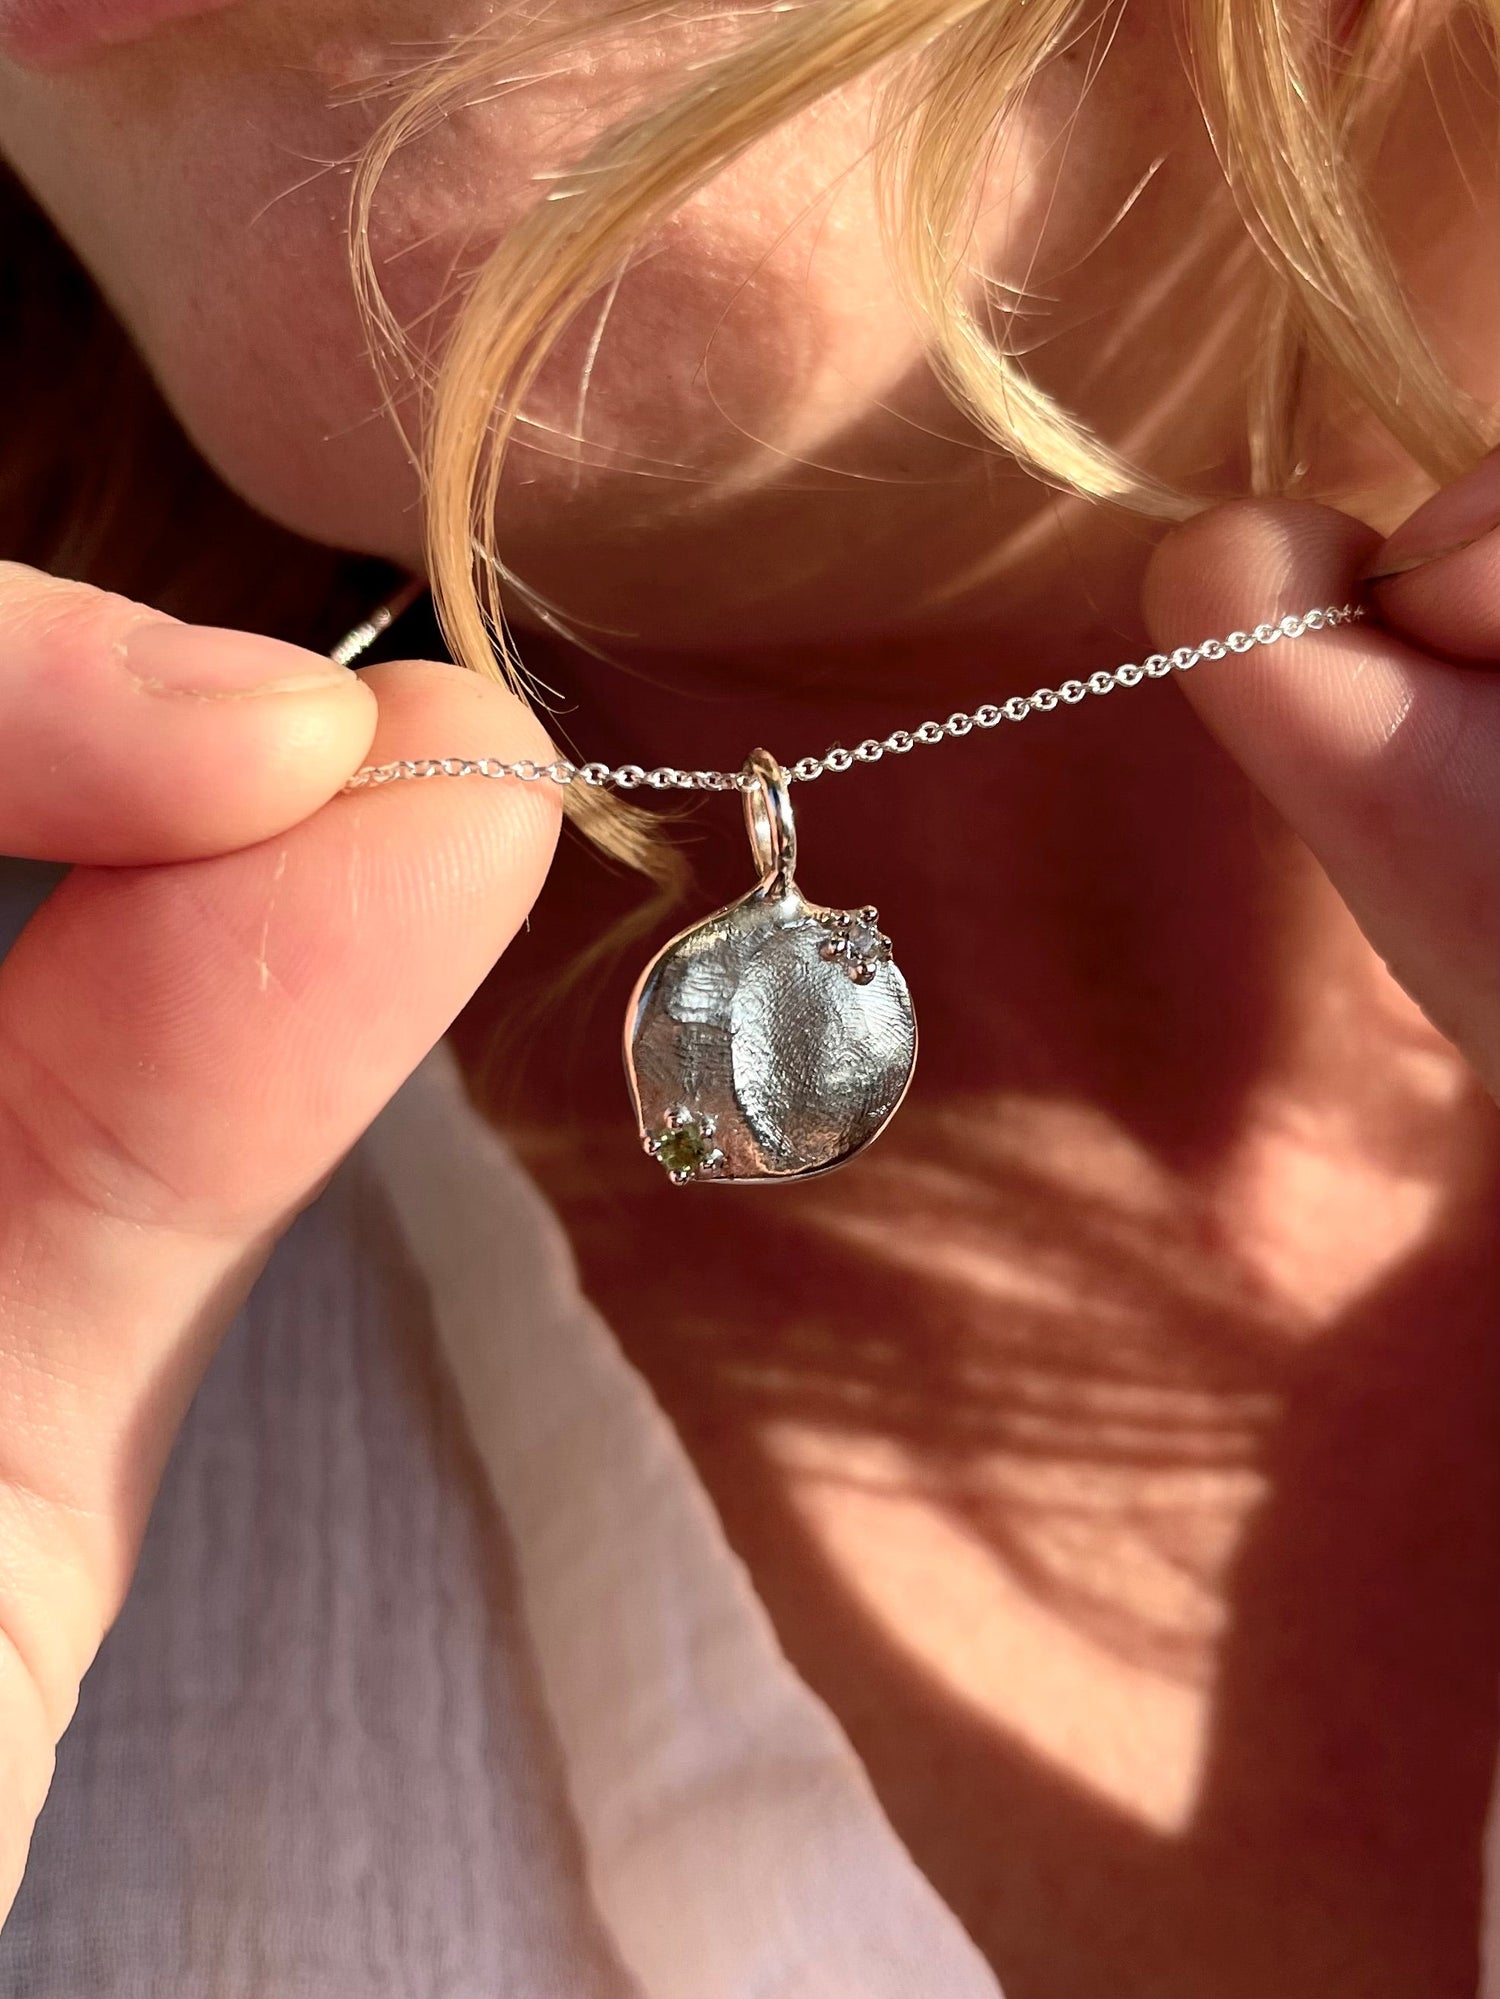 Add a Gemstone to your Fingerprint Pendant - Add On Only